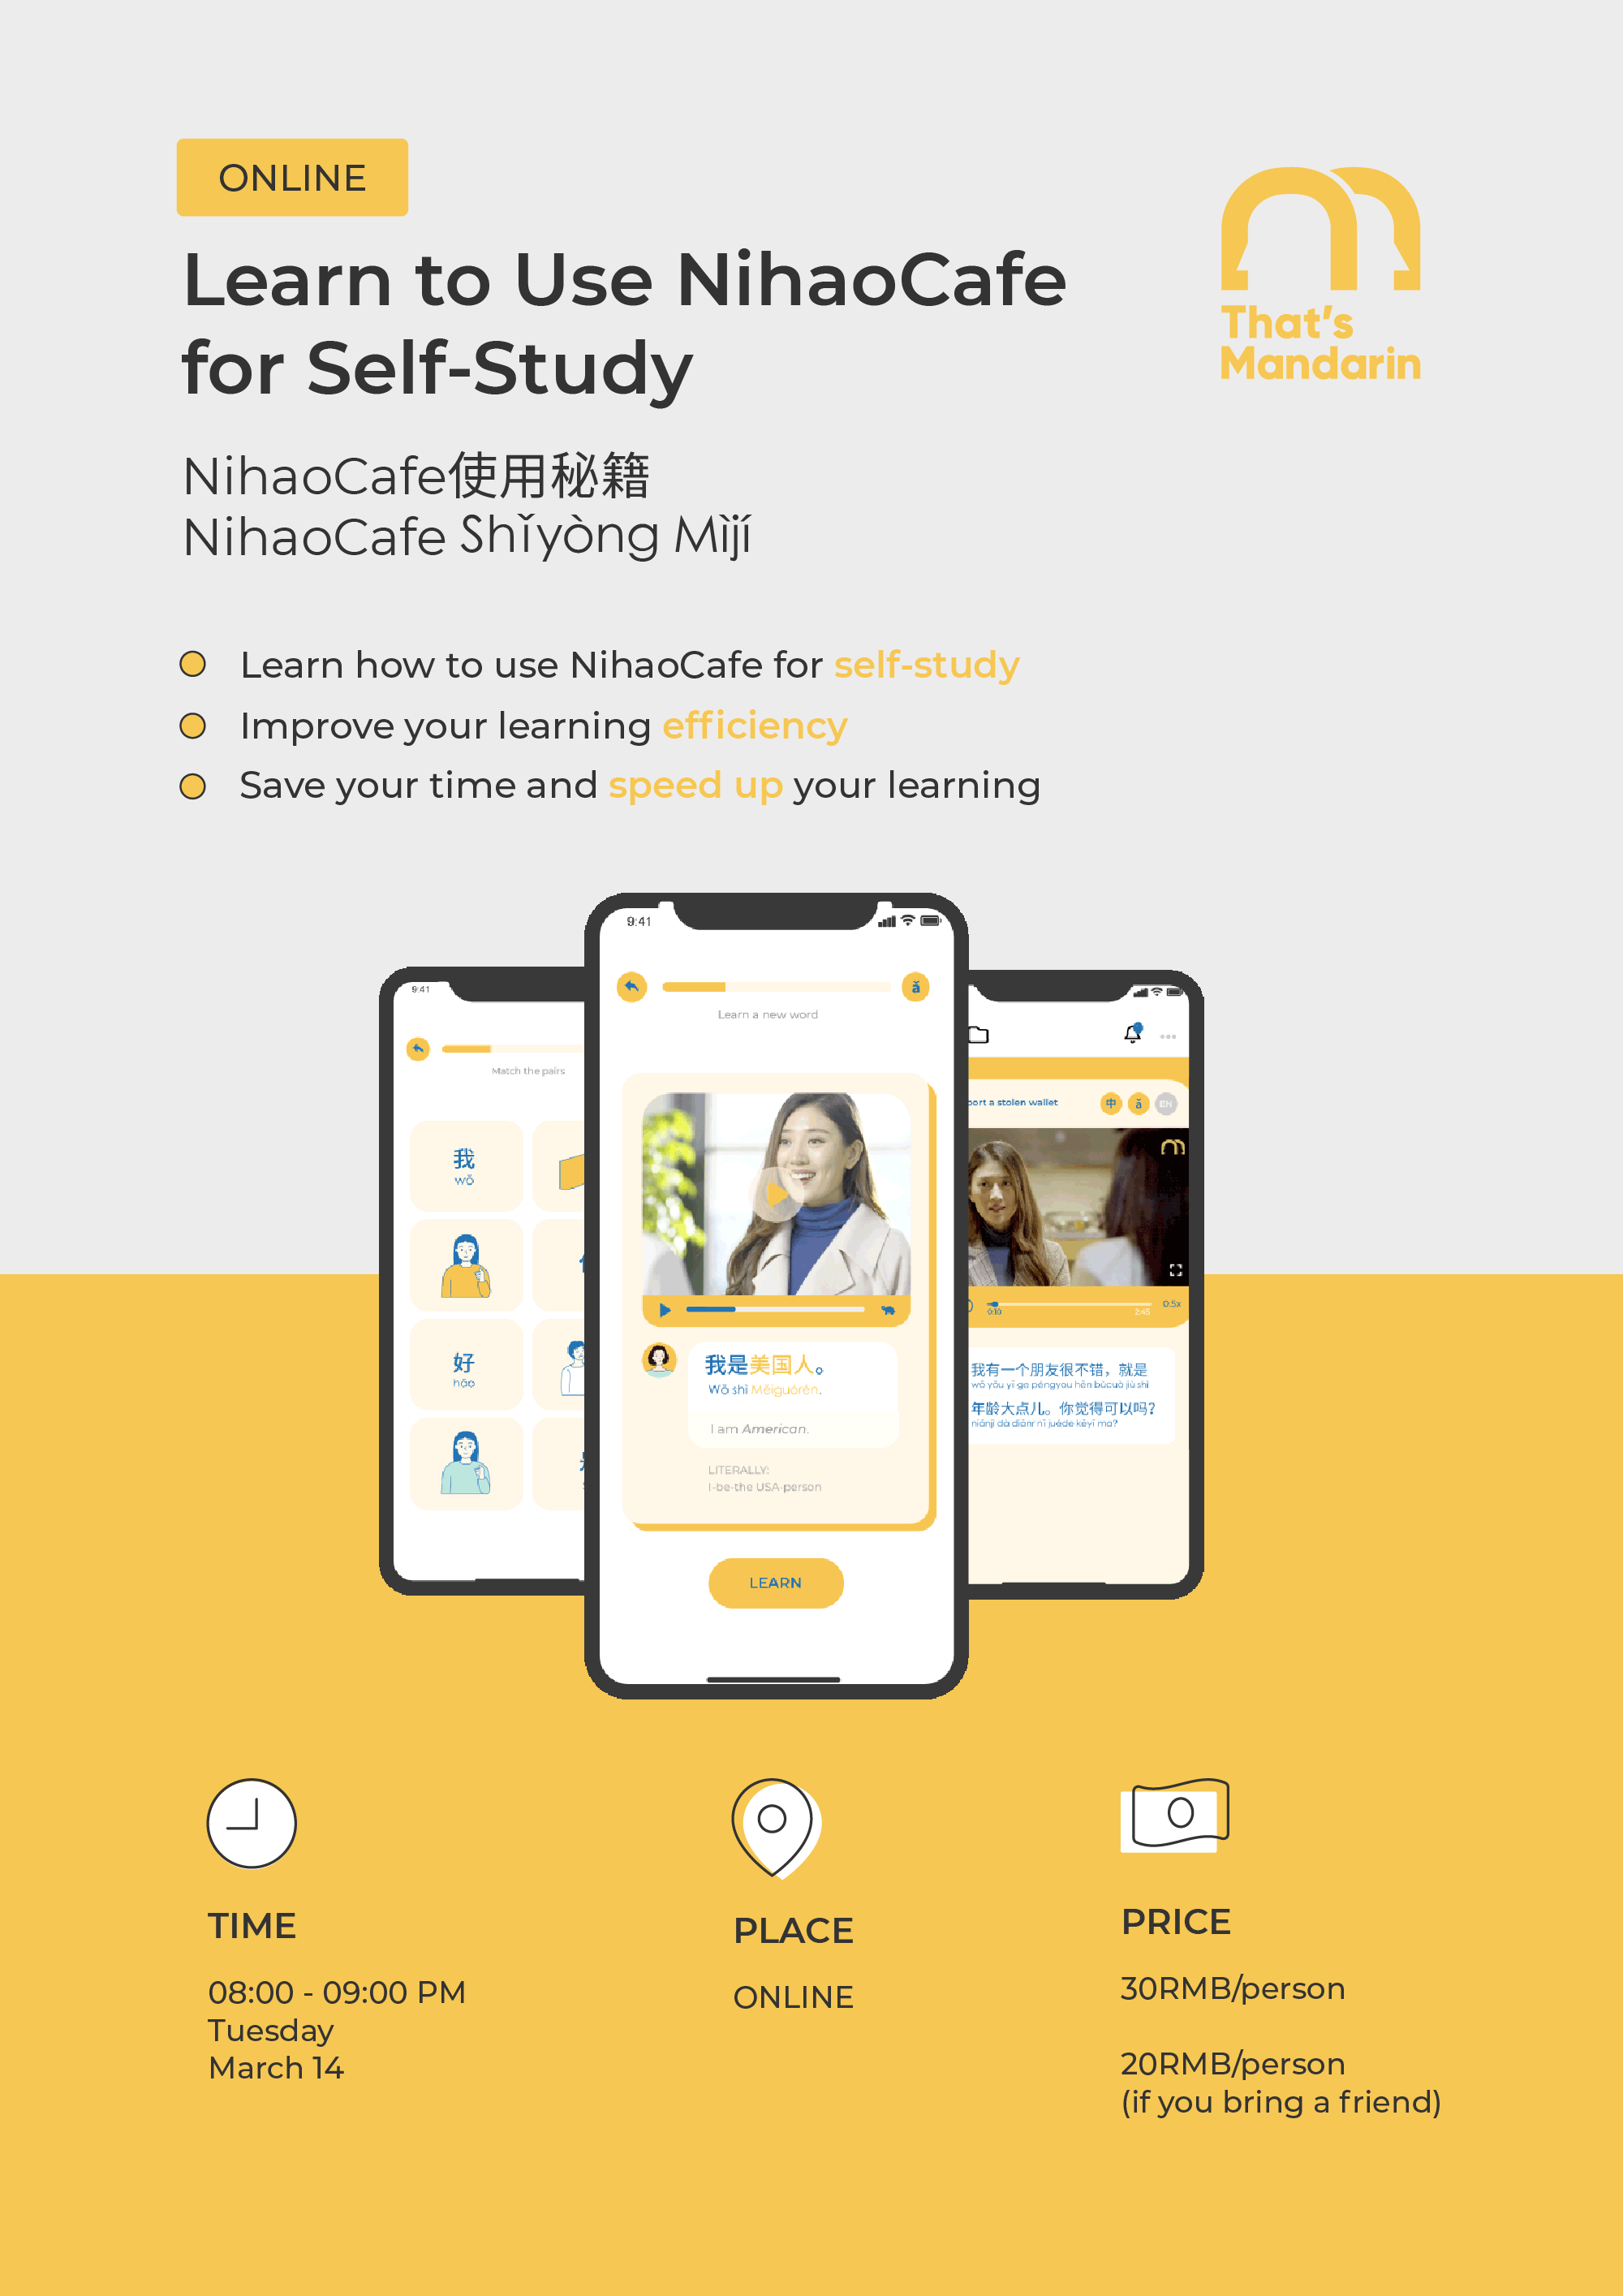 Mar 14, 2023: Learn to Use NihaoCafe for Self-Study | That's Mandarin Workshop 2023